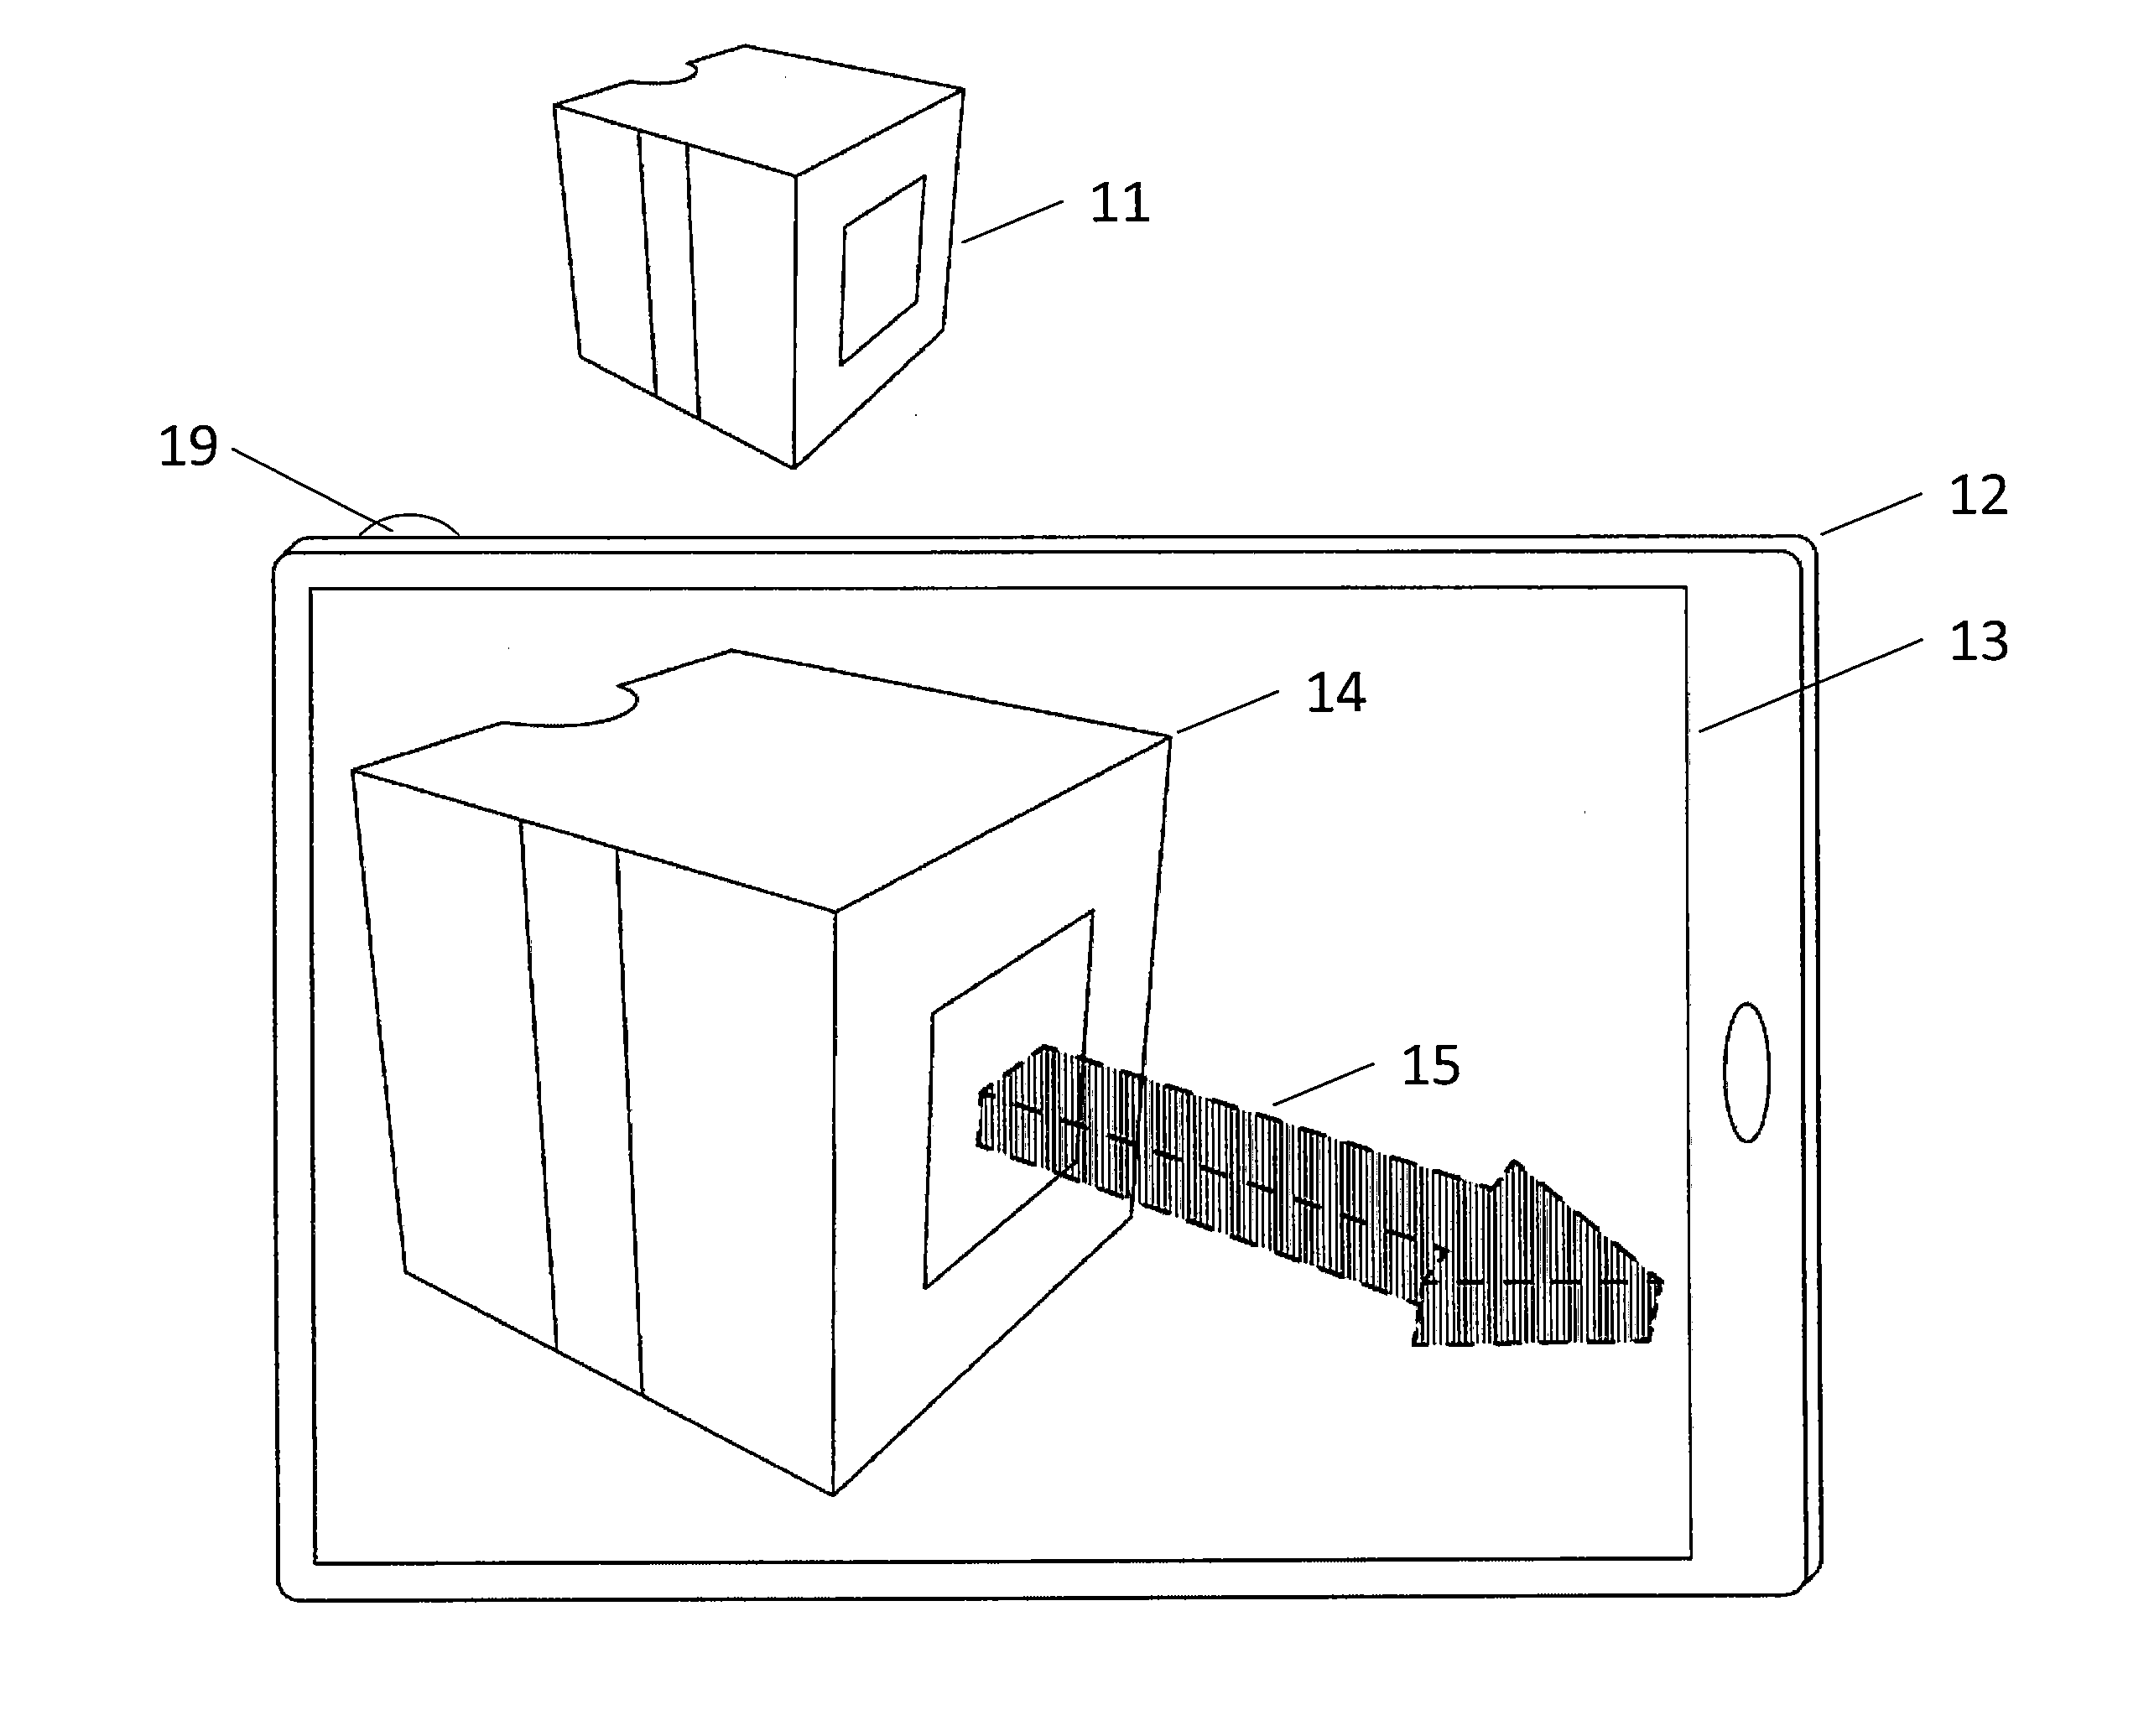 Method and system for providing information associated with a view of a real environment superimposed with a virtual object